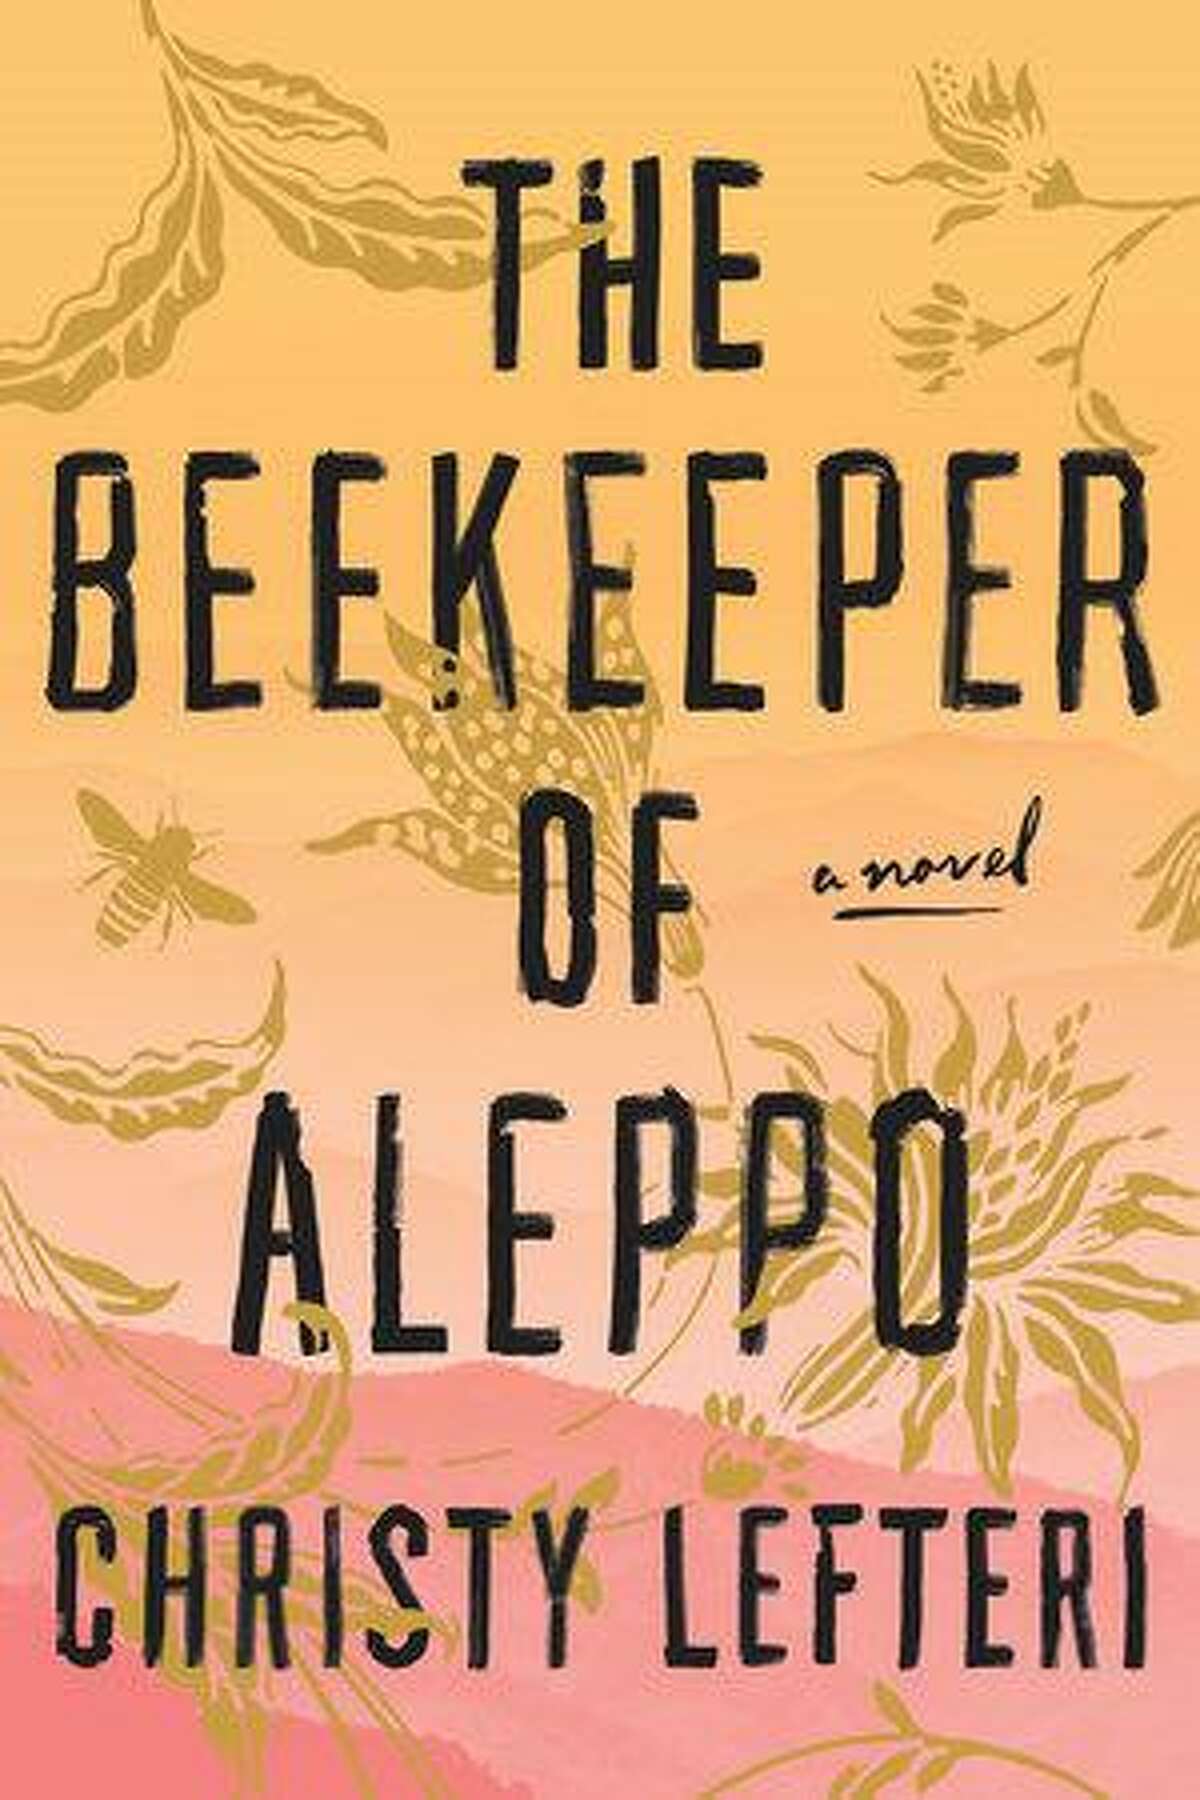 “The Beekeeper of Aleppo” by Christy Lefteri.